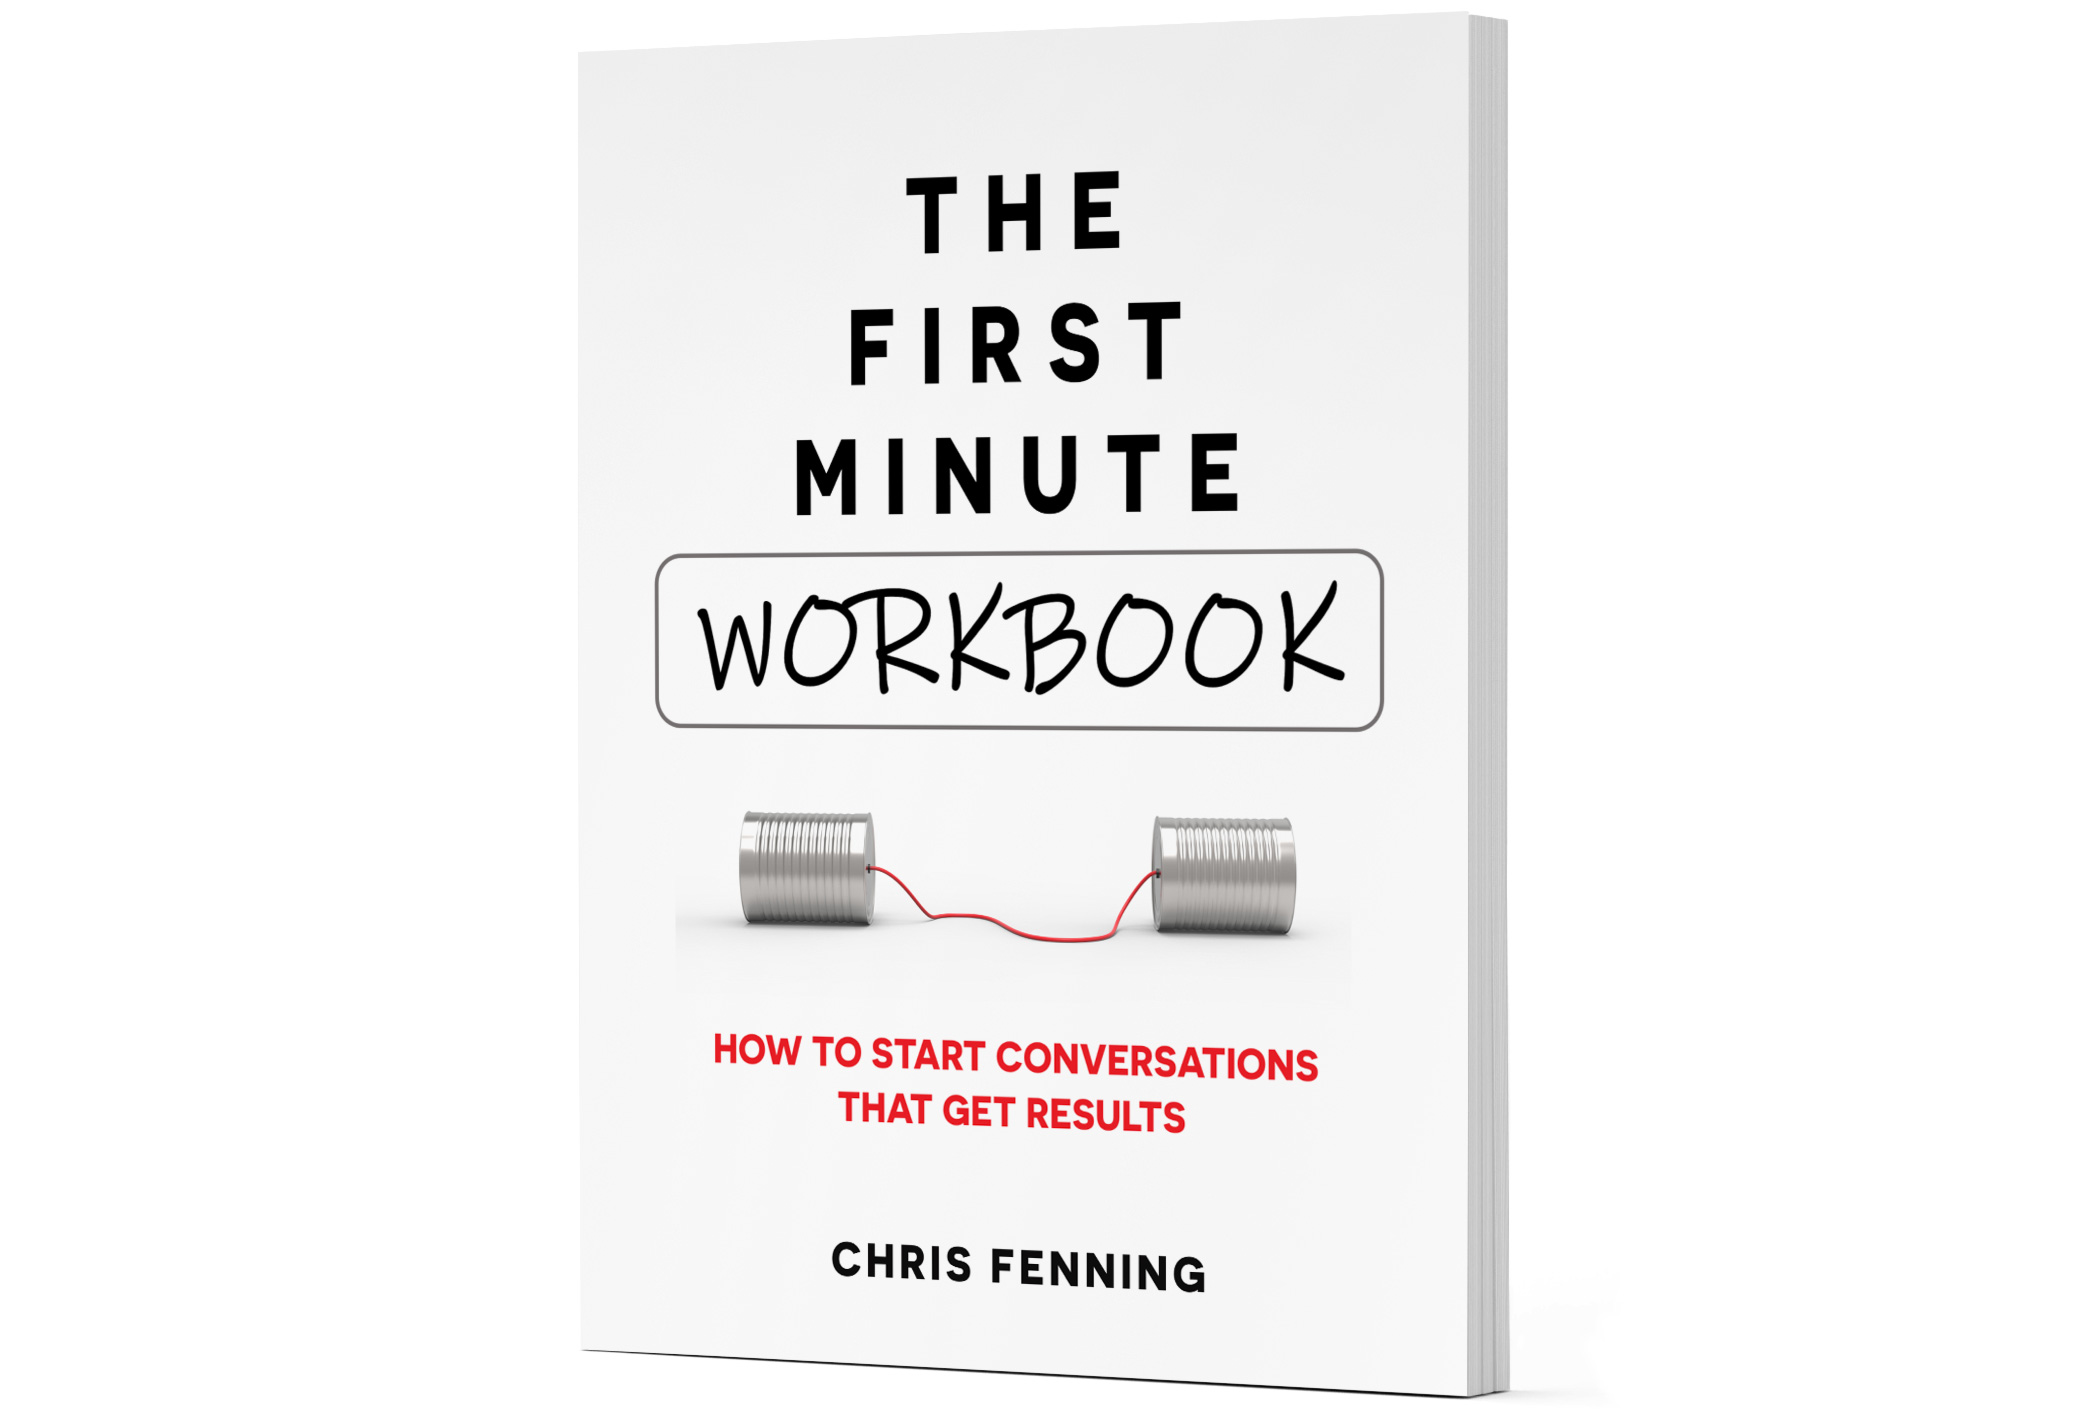 The First Minute Workbook by Chris Fenning